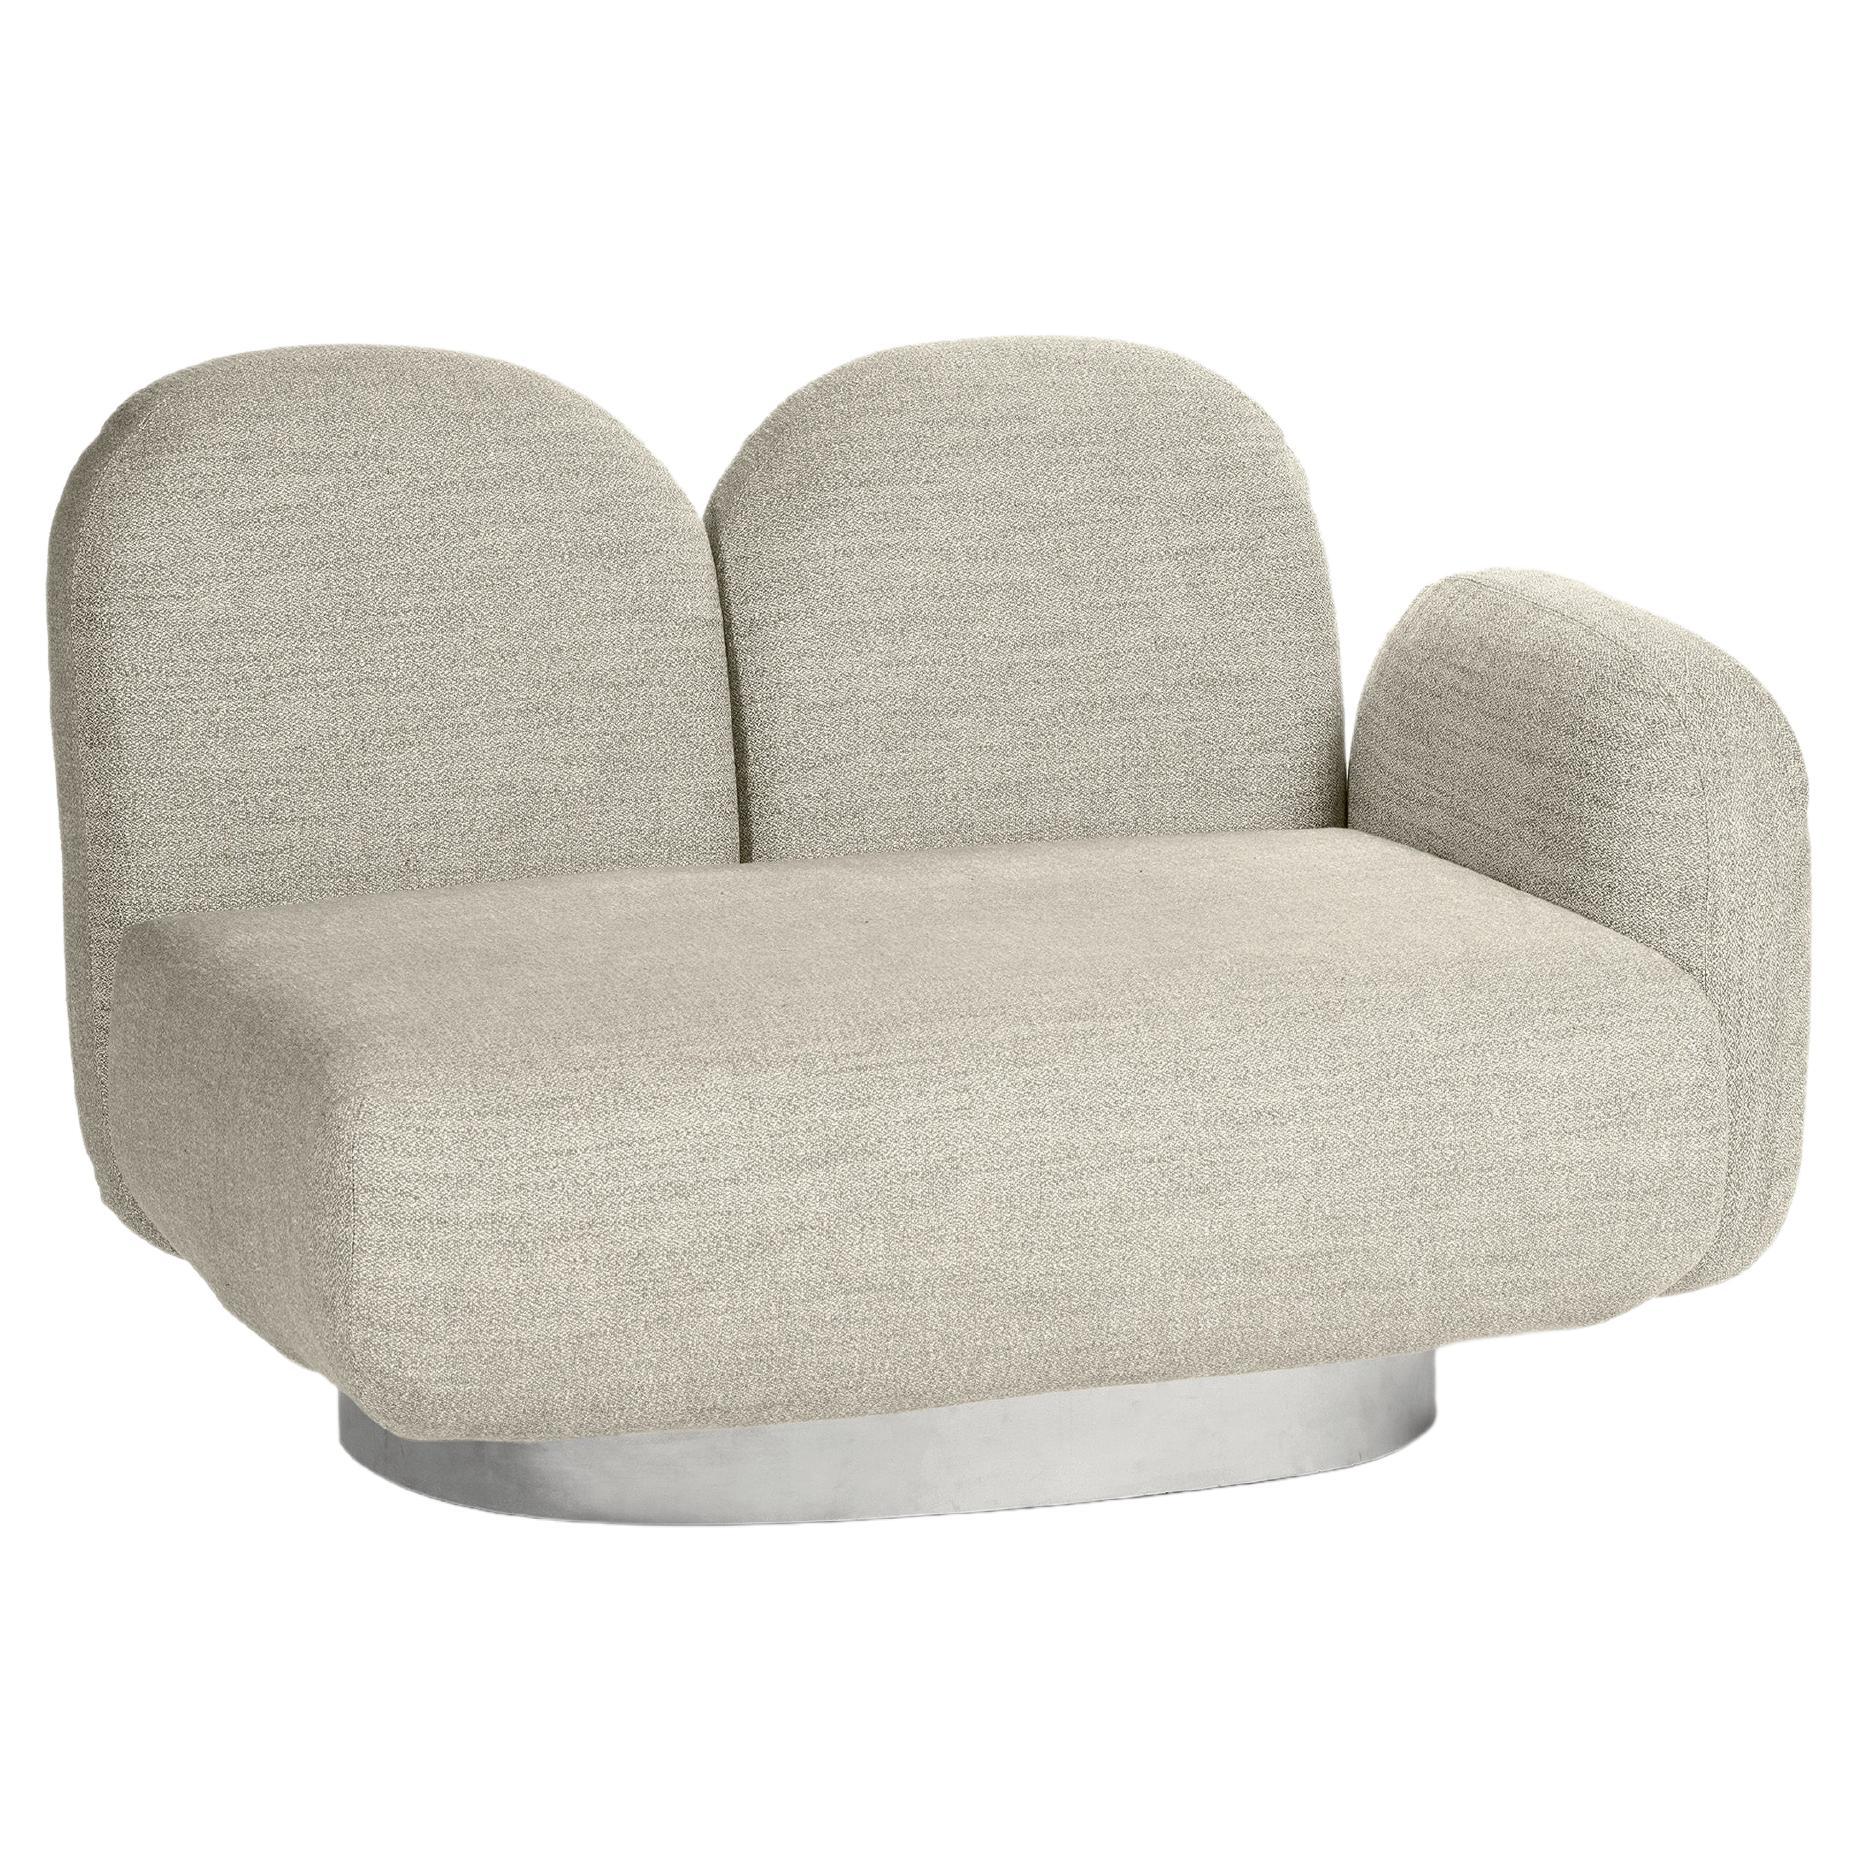 Contemporary Sofa 'Assemble' by Destroyers/Builders,  1 seaters + 1 armrest